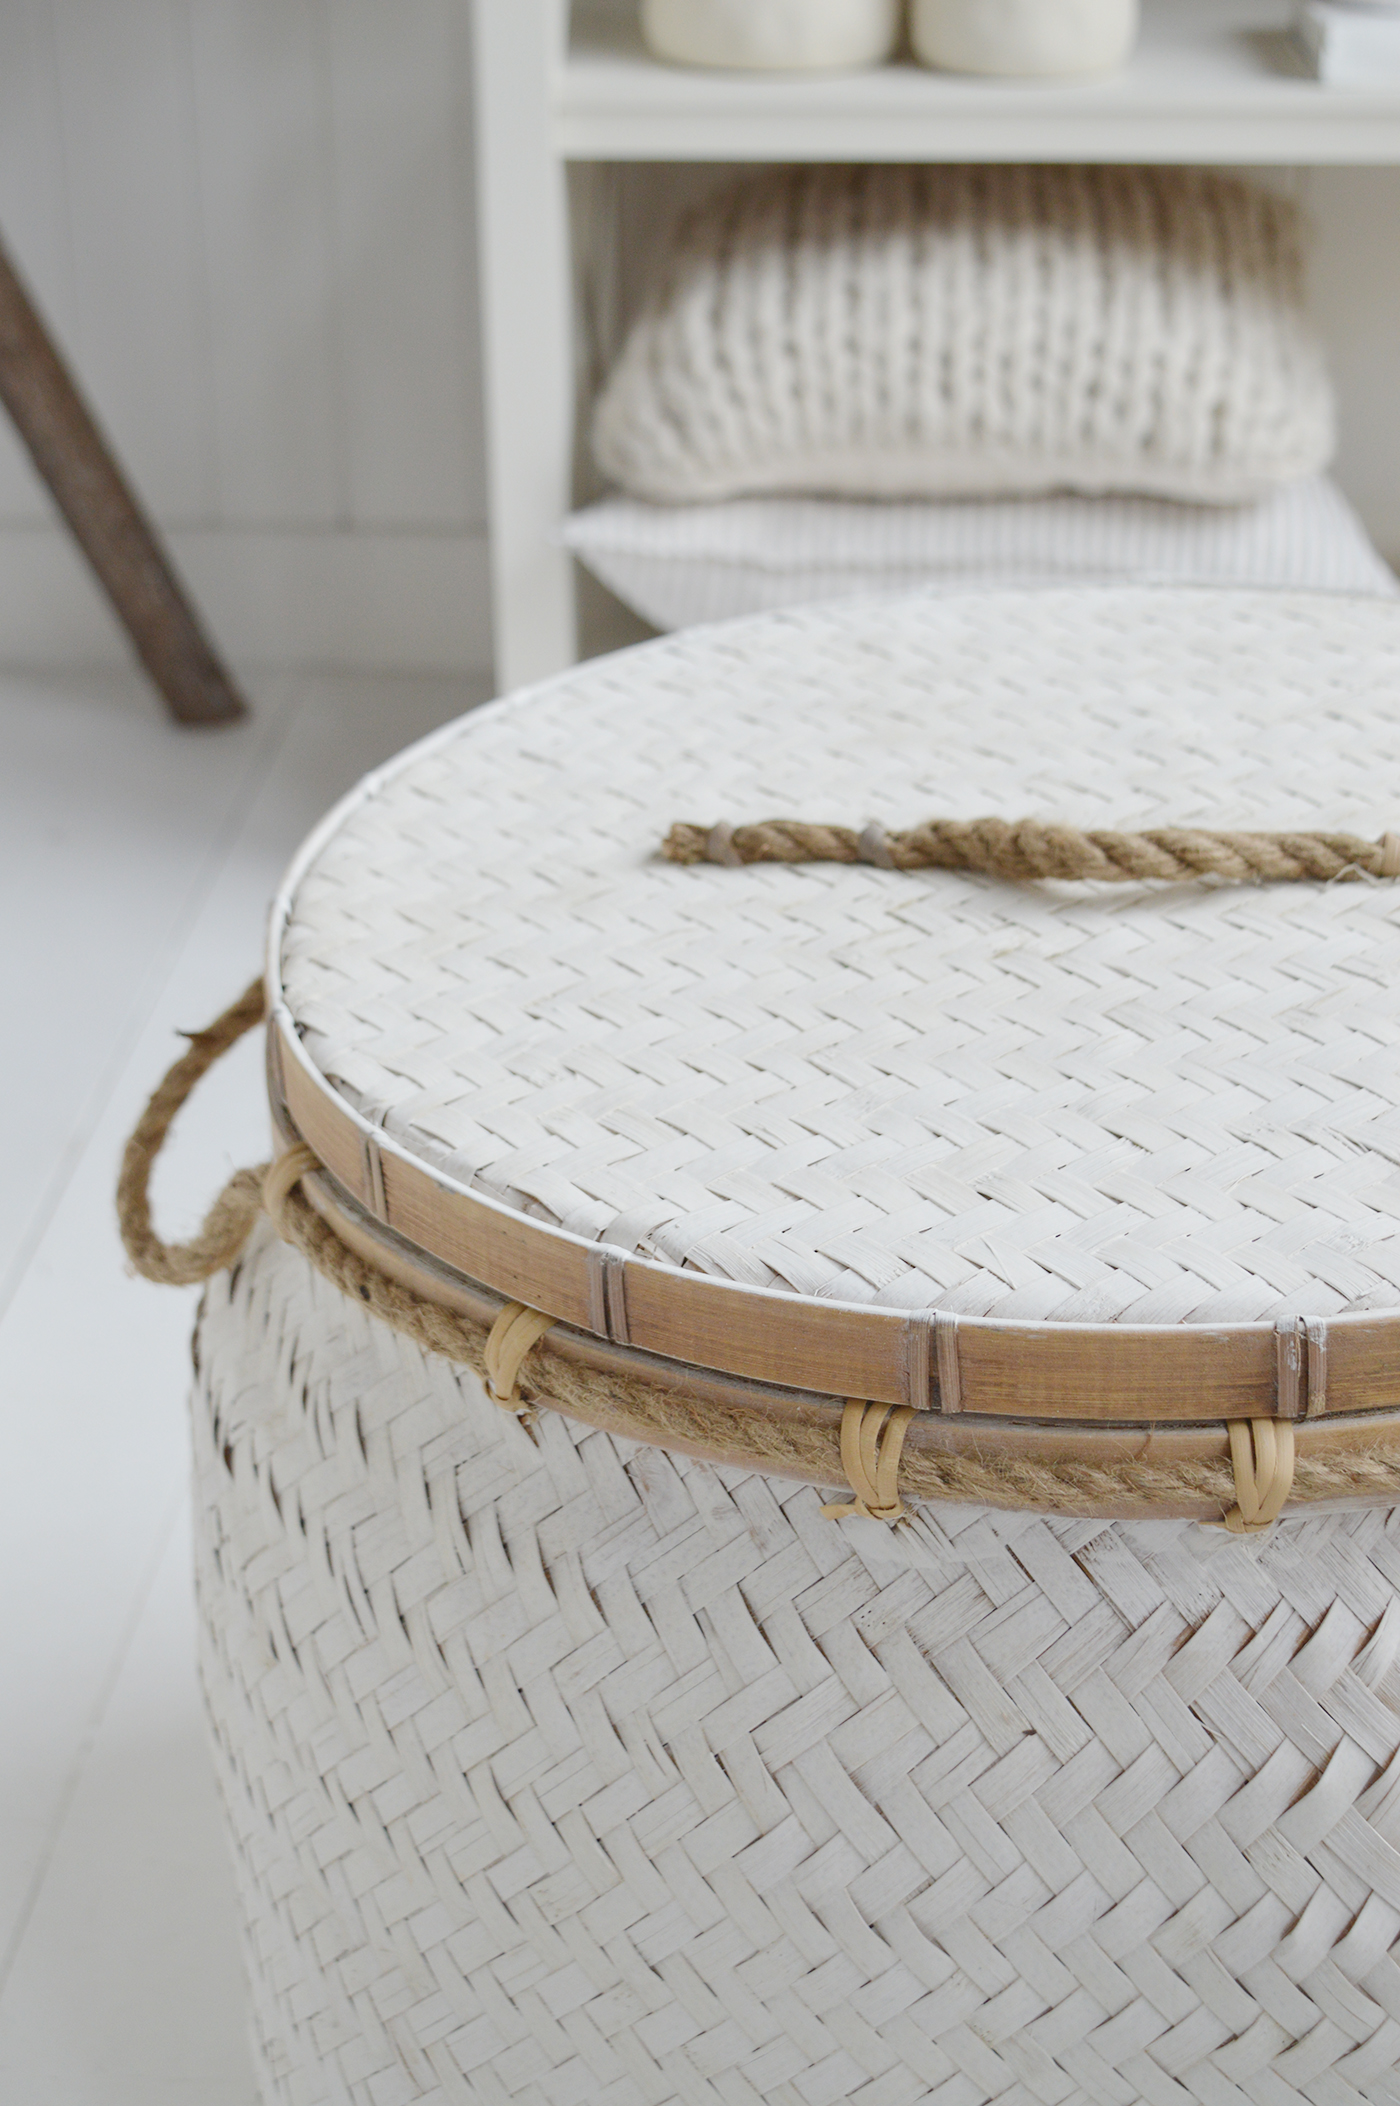 The rustic Nantucket white table basket with a lid ... coffee table, side table , laundry basket ...  such a versatile piece of coastal furniture which complements all our New England styles of interiors